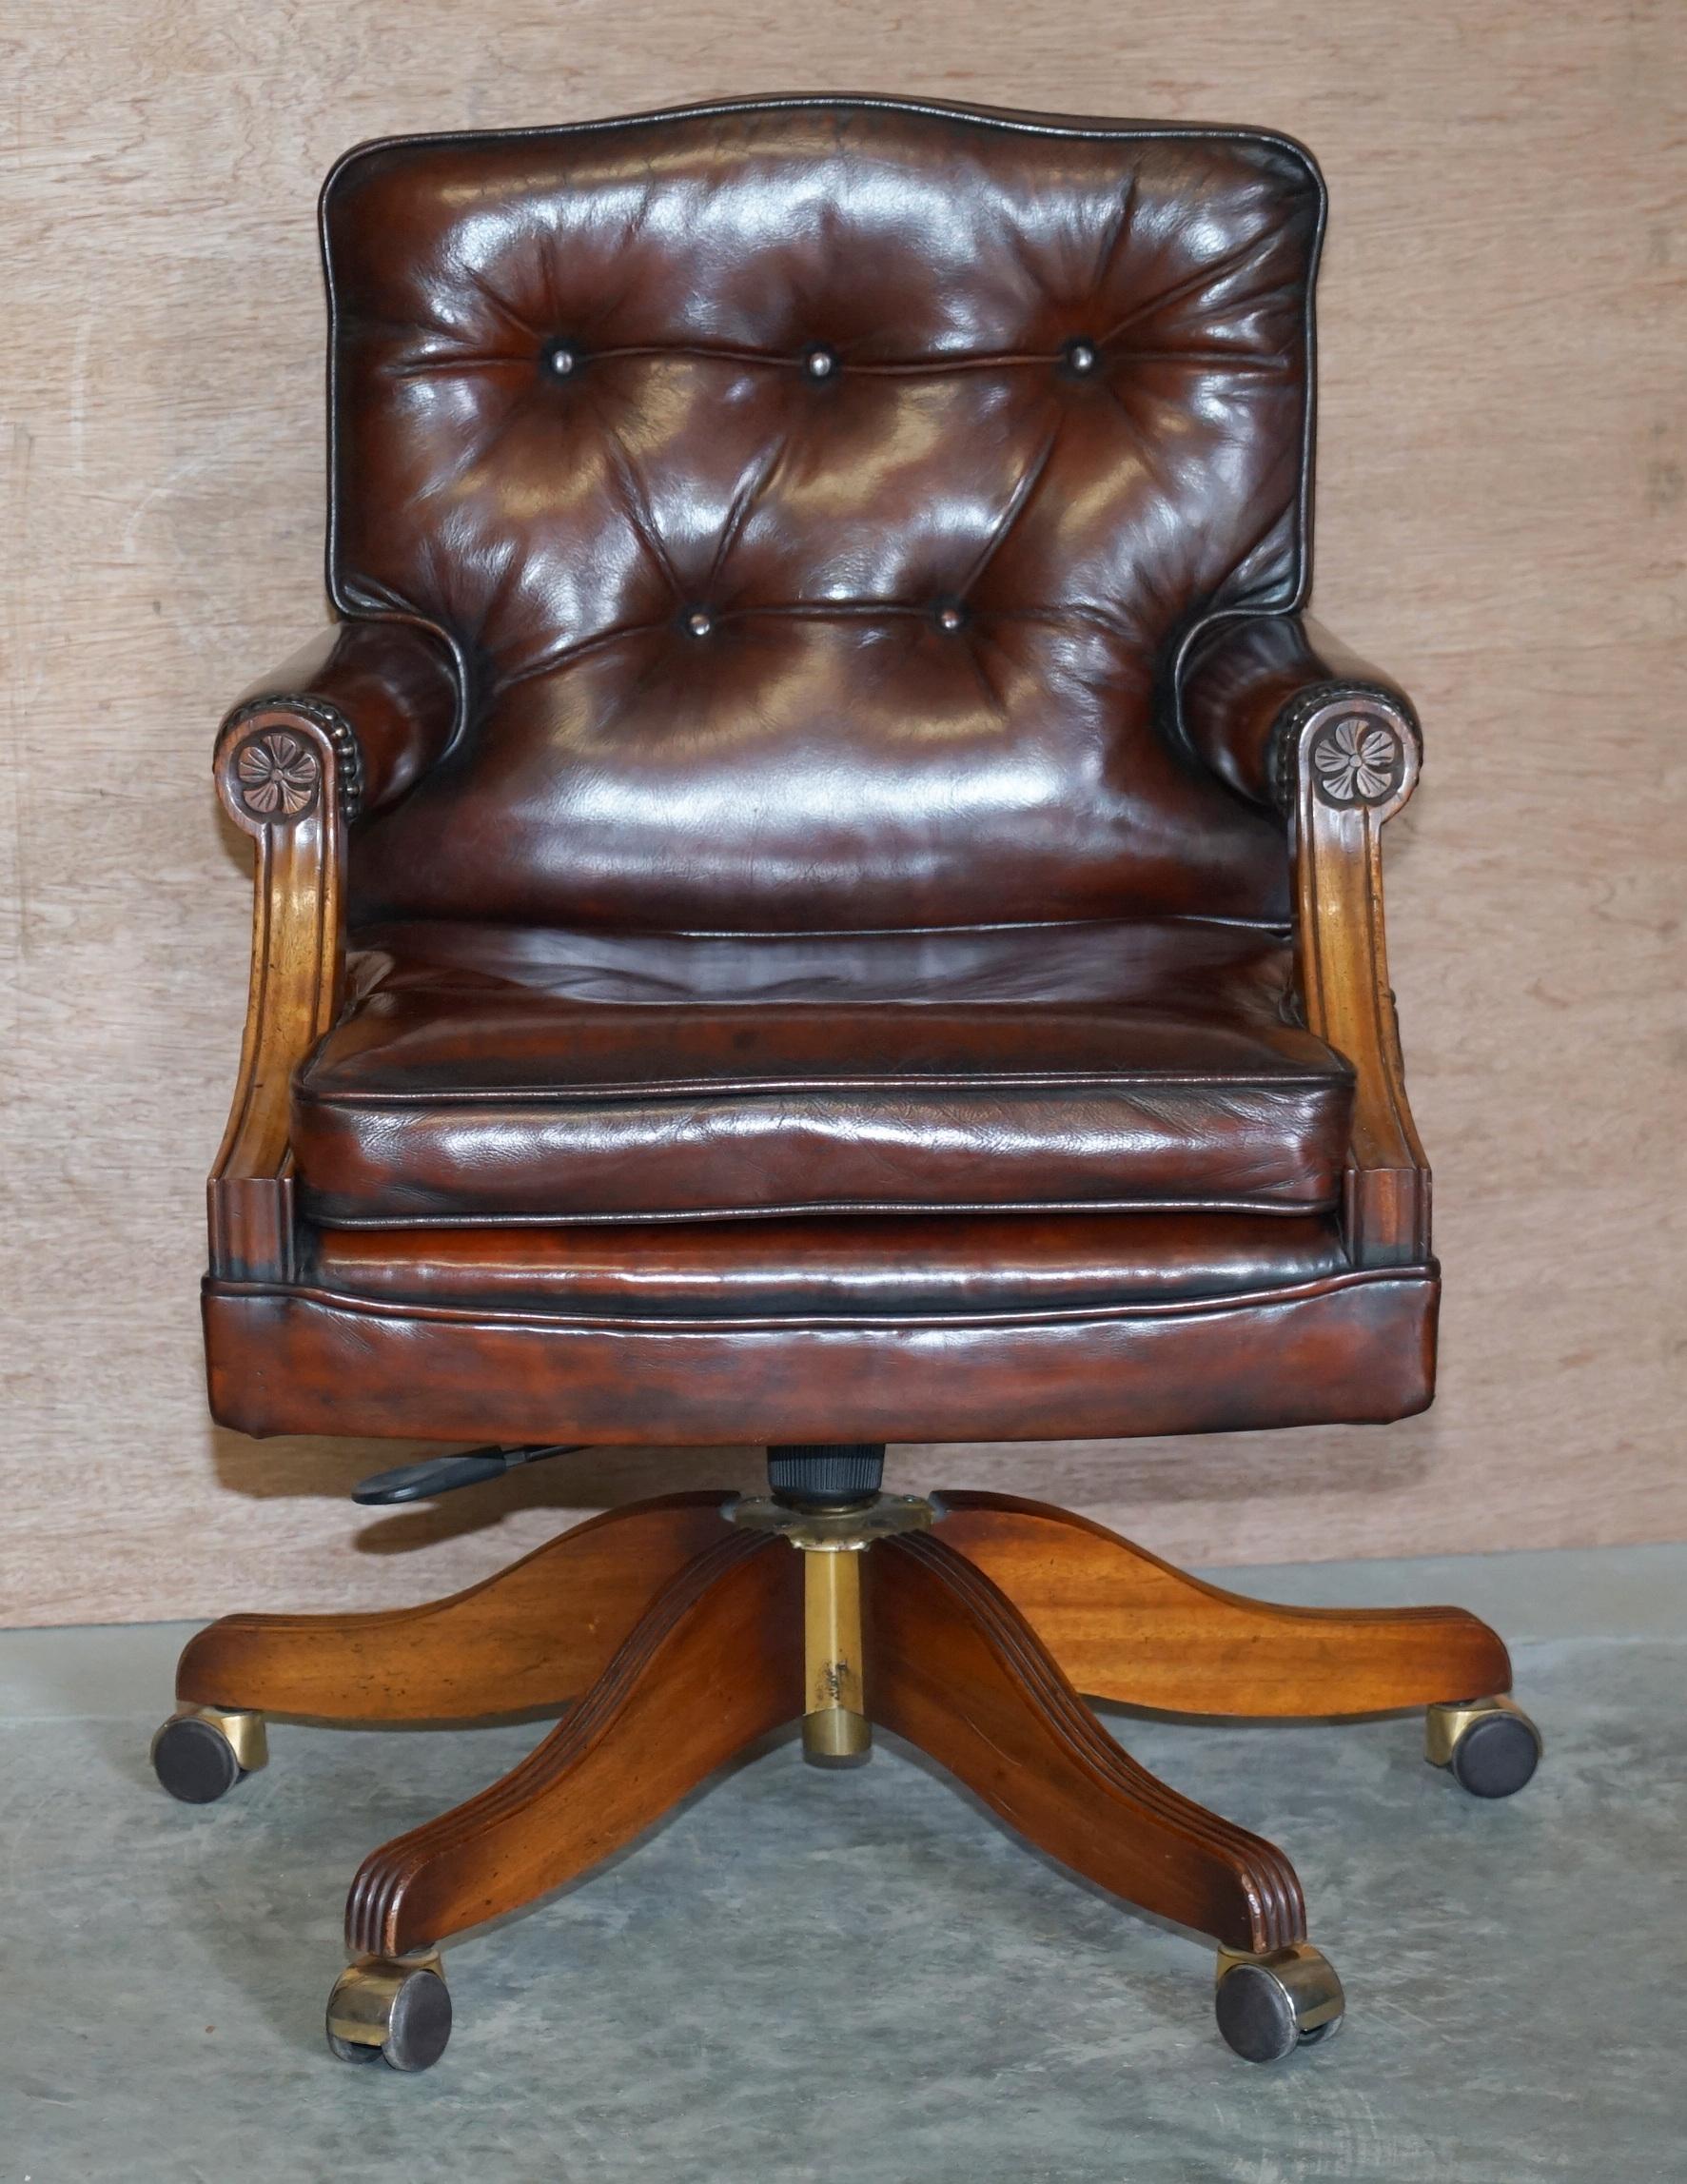 We are delighted to offer for sale this lovely fully restored original oak framed vintage hand dyed Chesterfield cigar brown leather directors chair

A very good looking well made and comfortable directors chair, I've not seen one with a solid oak